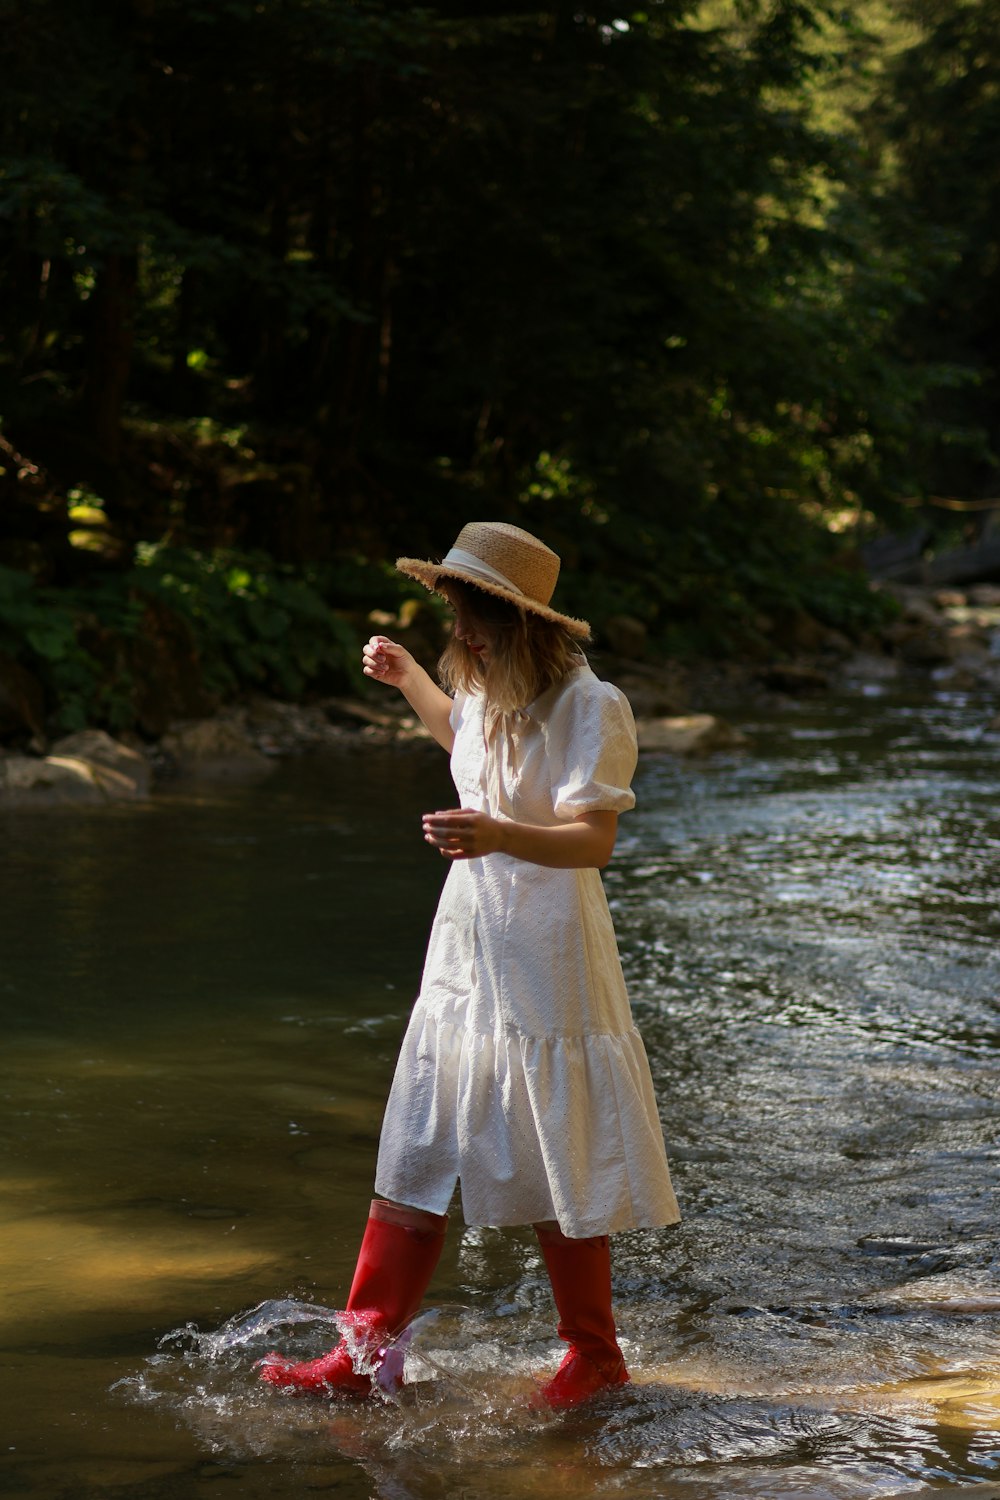 a woman in a white dress and red boots wading in a river